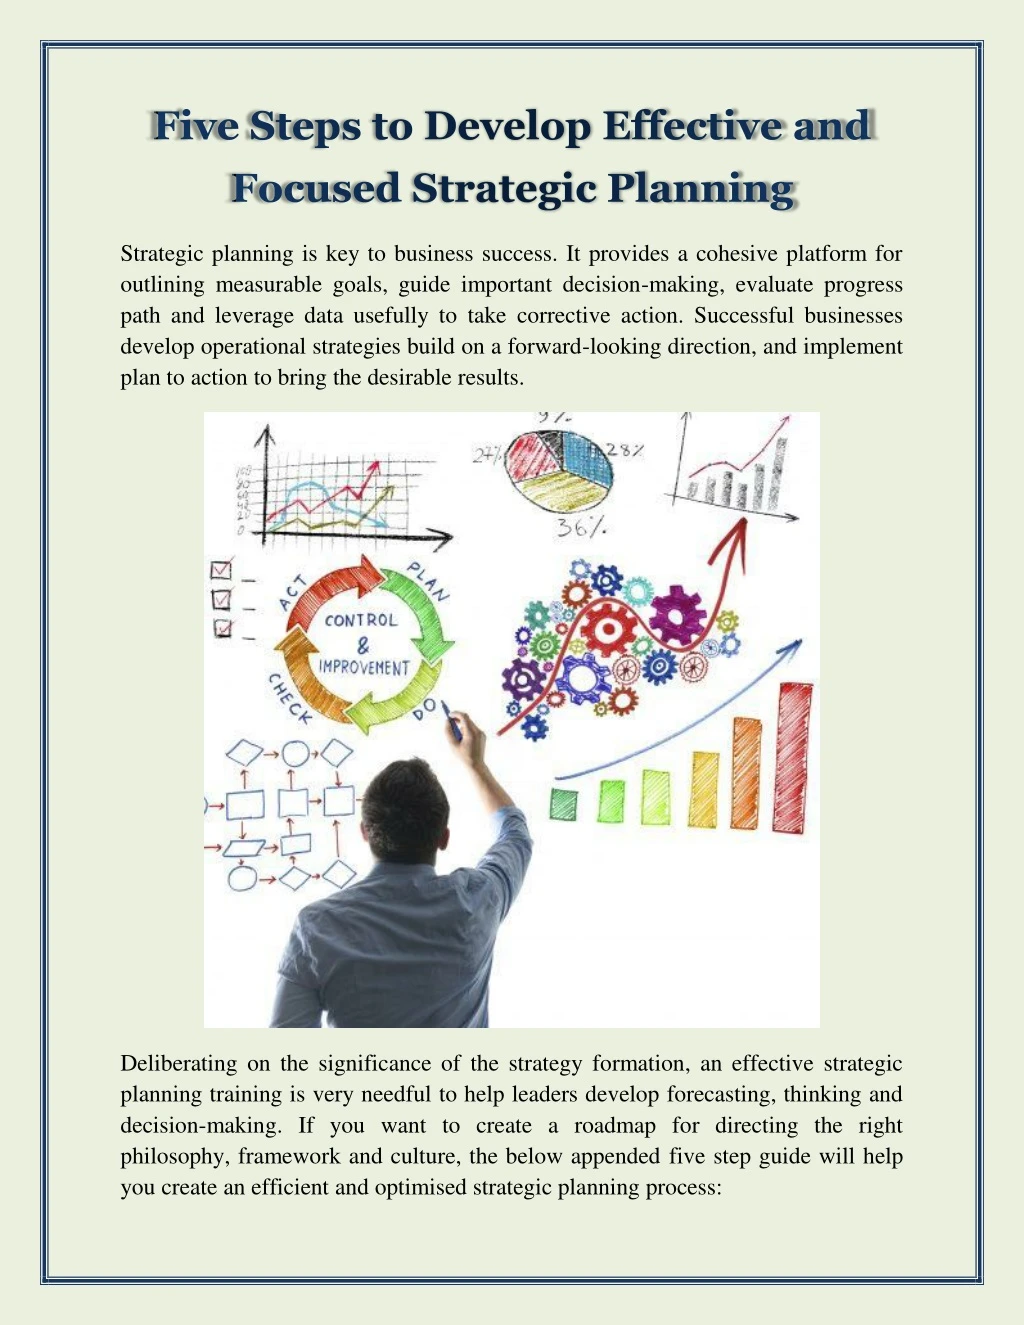 strategic planning is key to business success